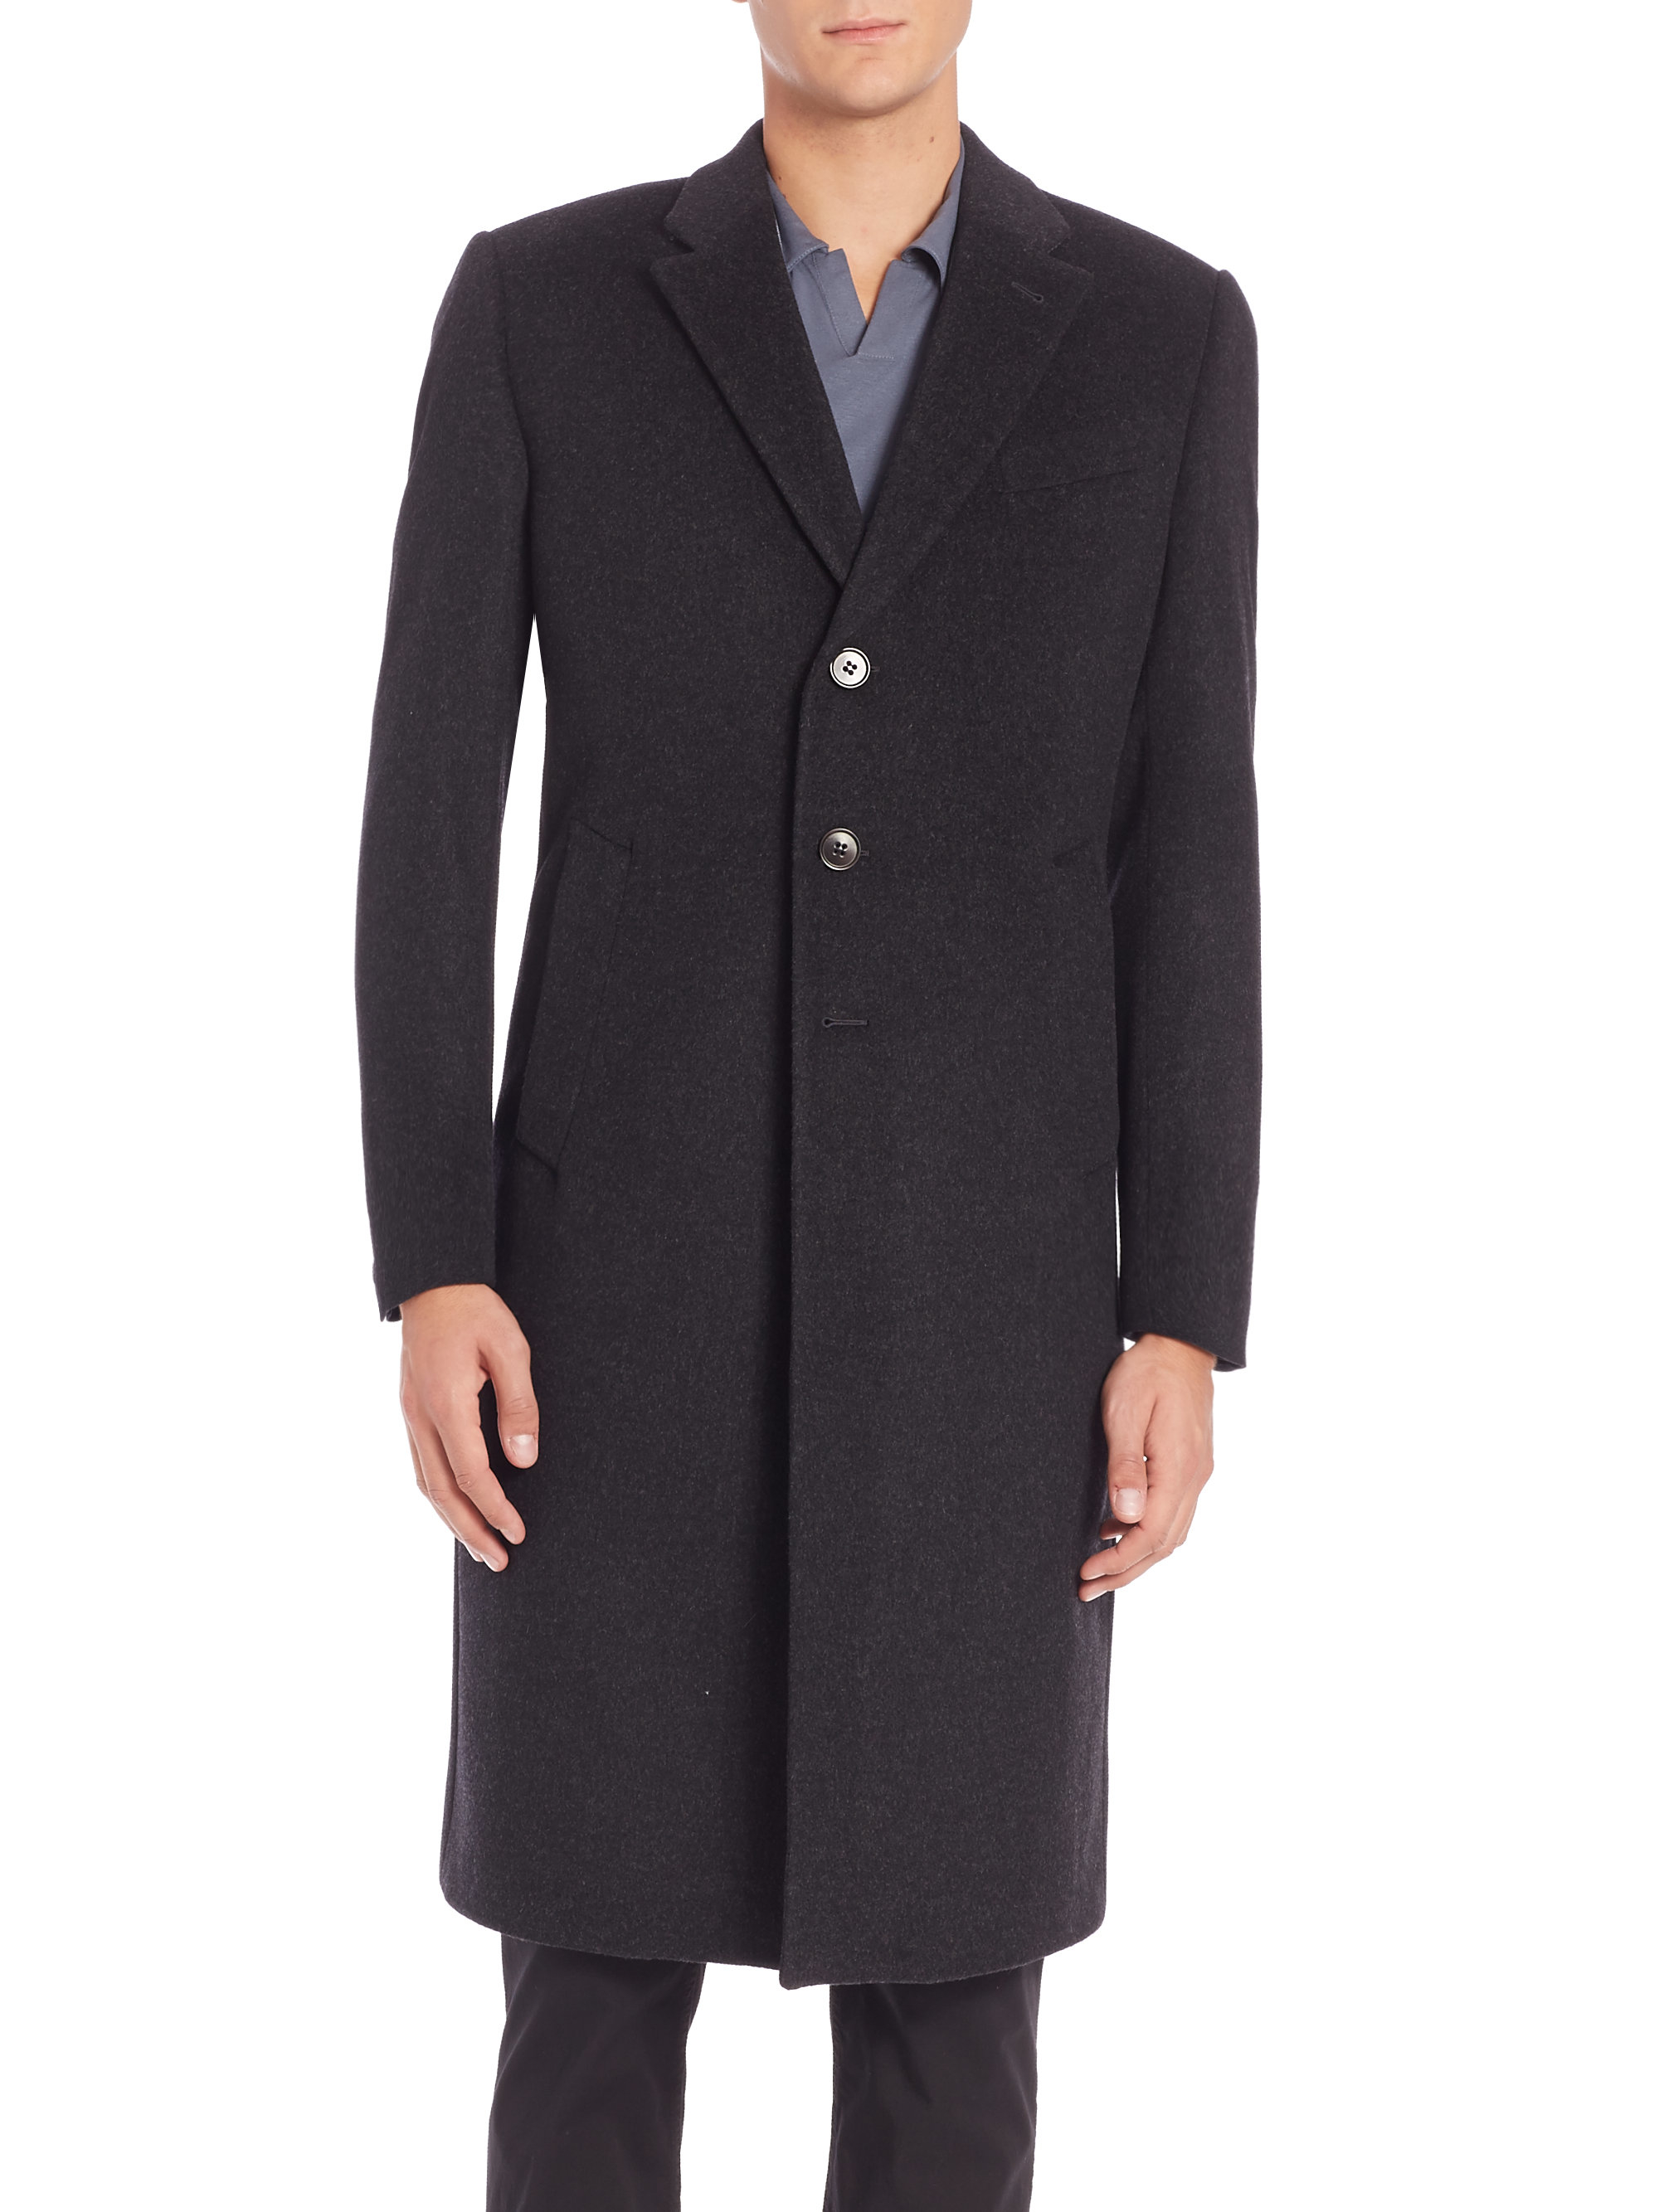 Lyst - Armani Wool-cashmere Coat in Black for Men